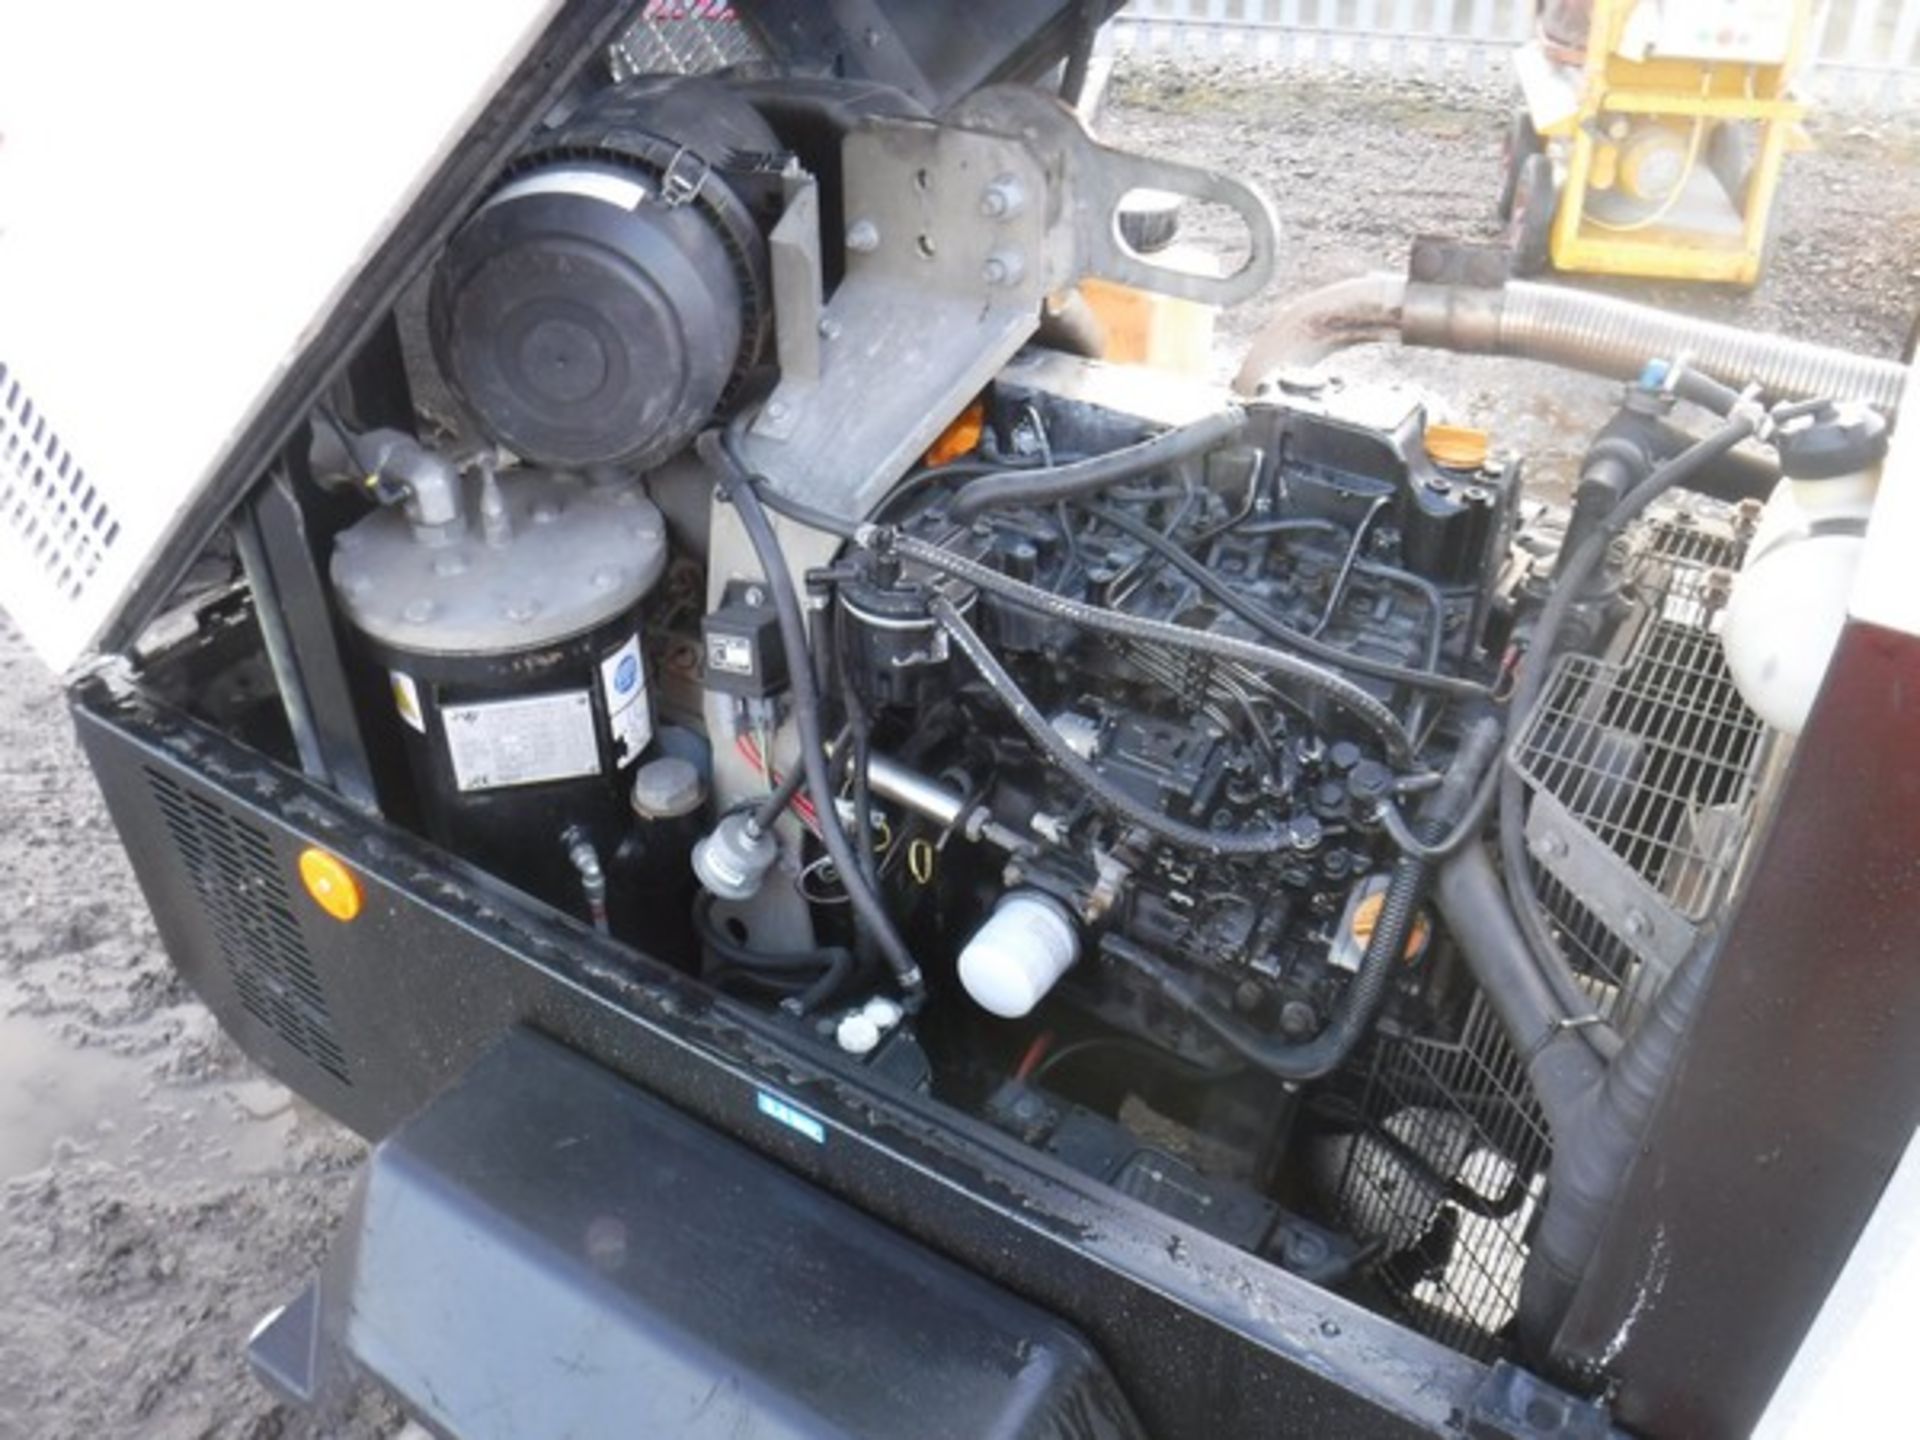 2008 INGERSOL RAND 2 tool compressor, S/N UN5741FXX8Y425338, 1320 hrs (not verified) - Image 3 of 6